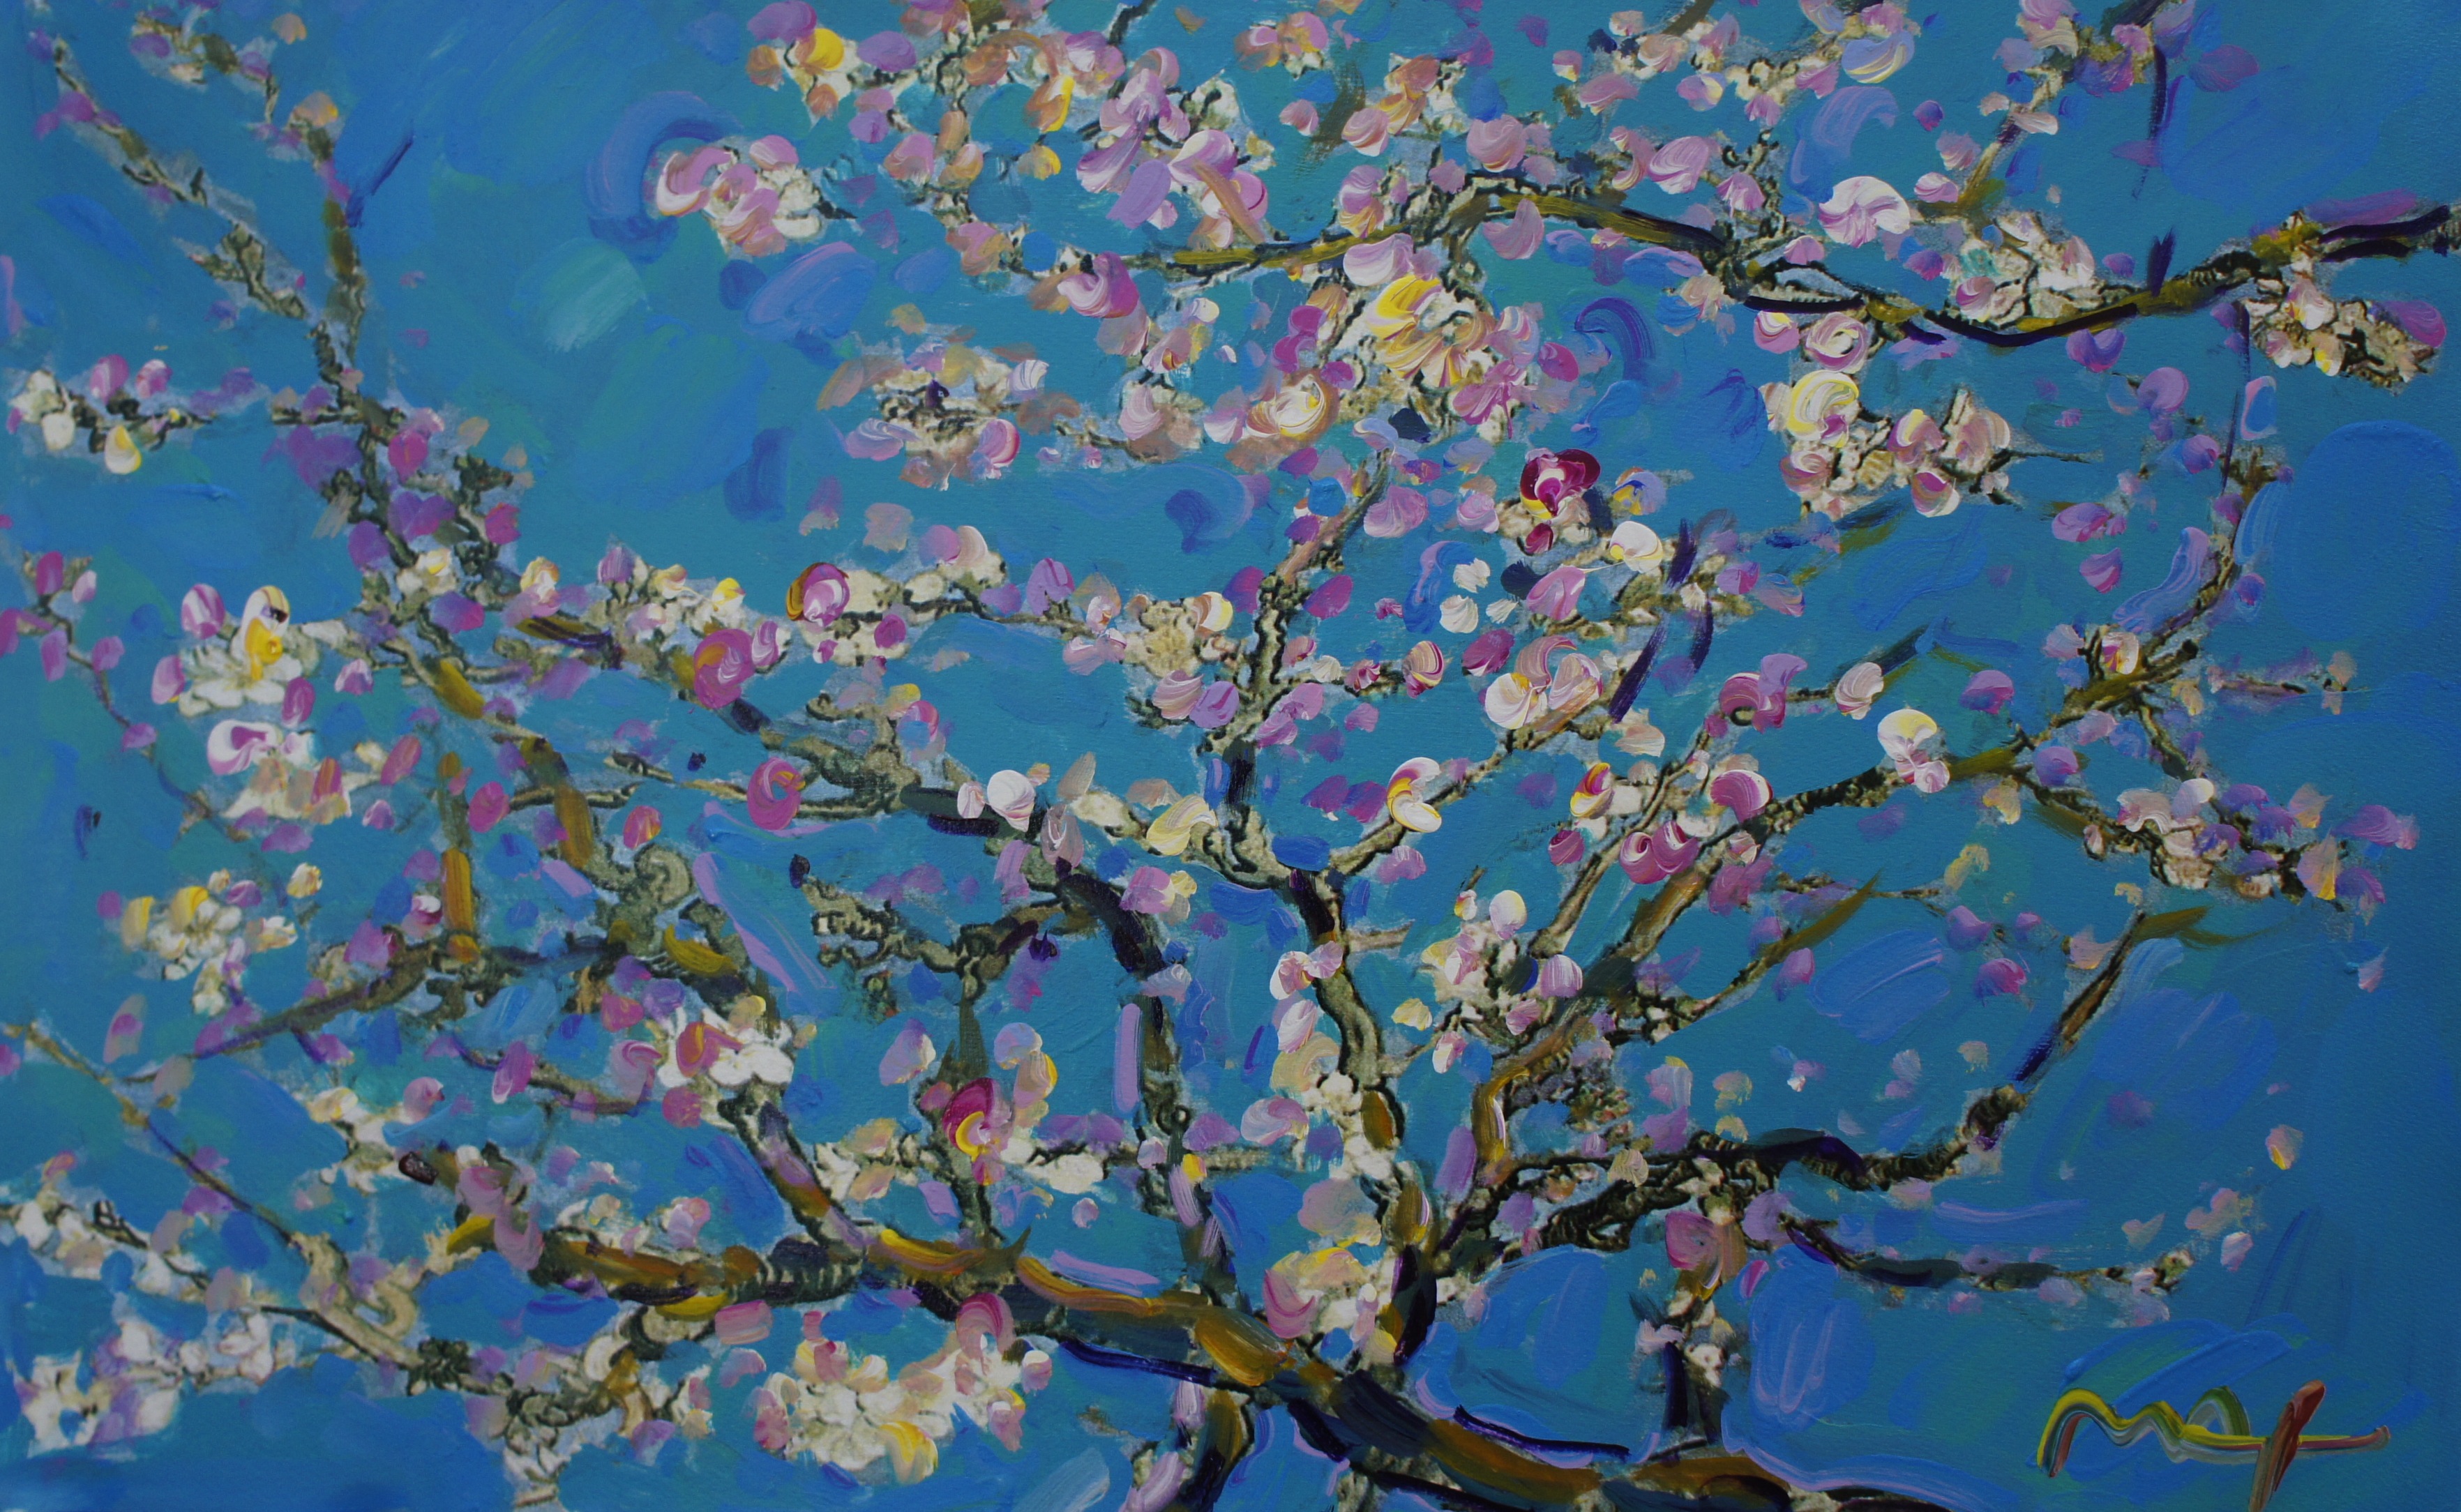 Van Gogh Almond Blossom Wallpaper Top Pictures Gallery Online